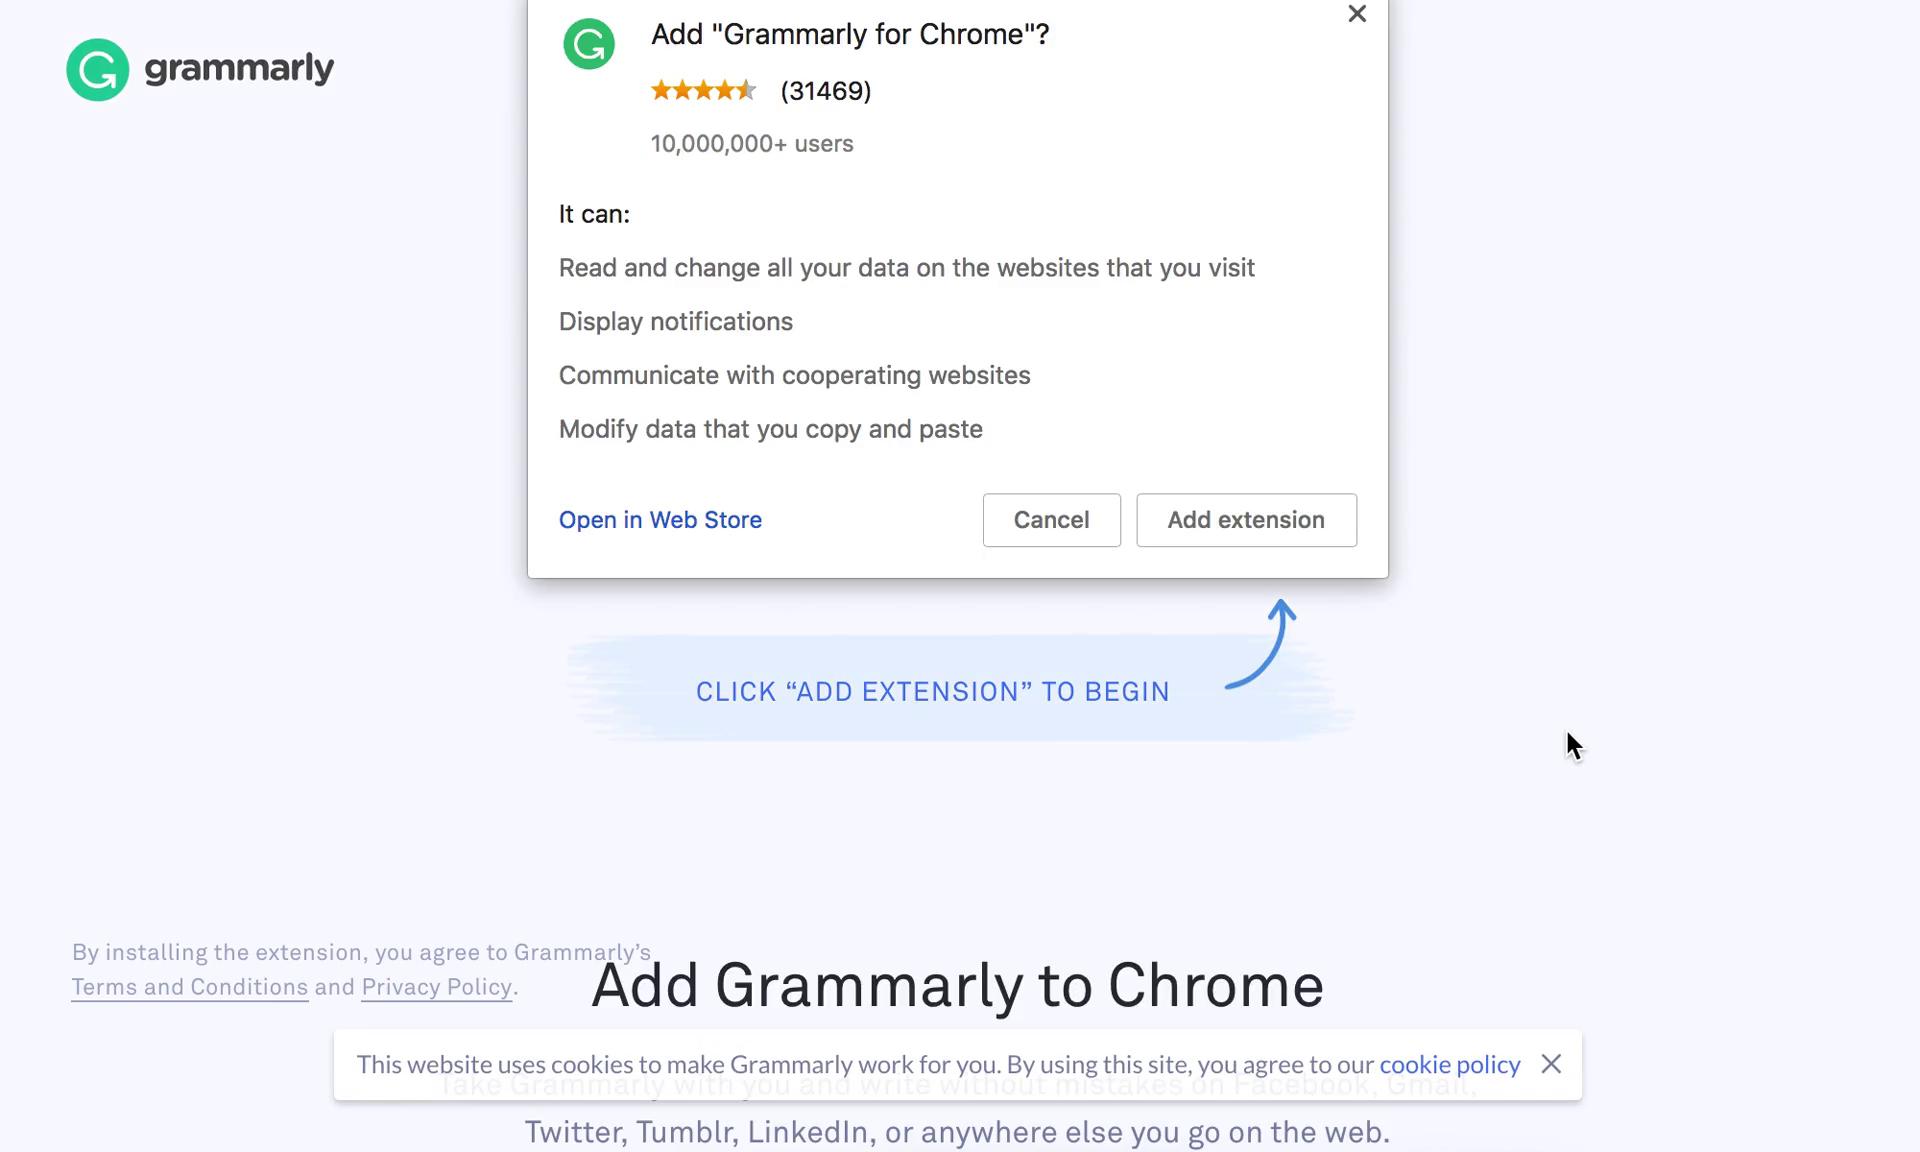 Screenshot of on Onboarding on Grammarly user flow